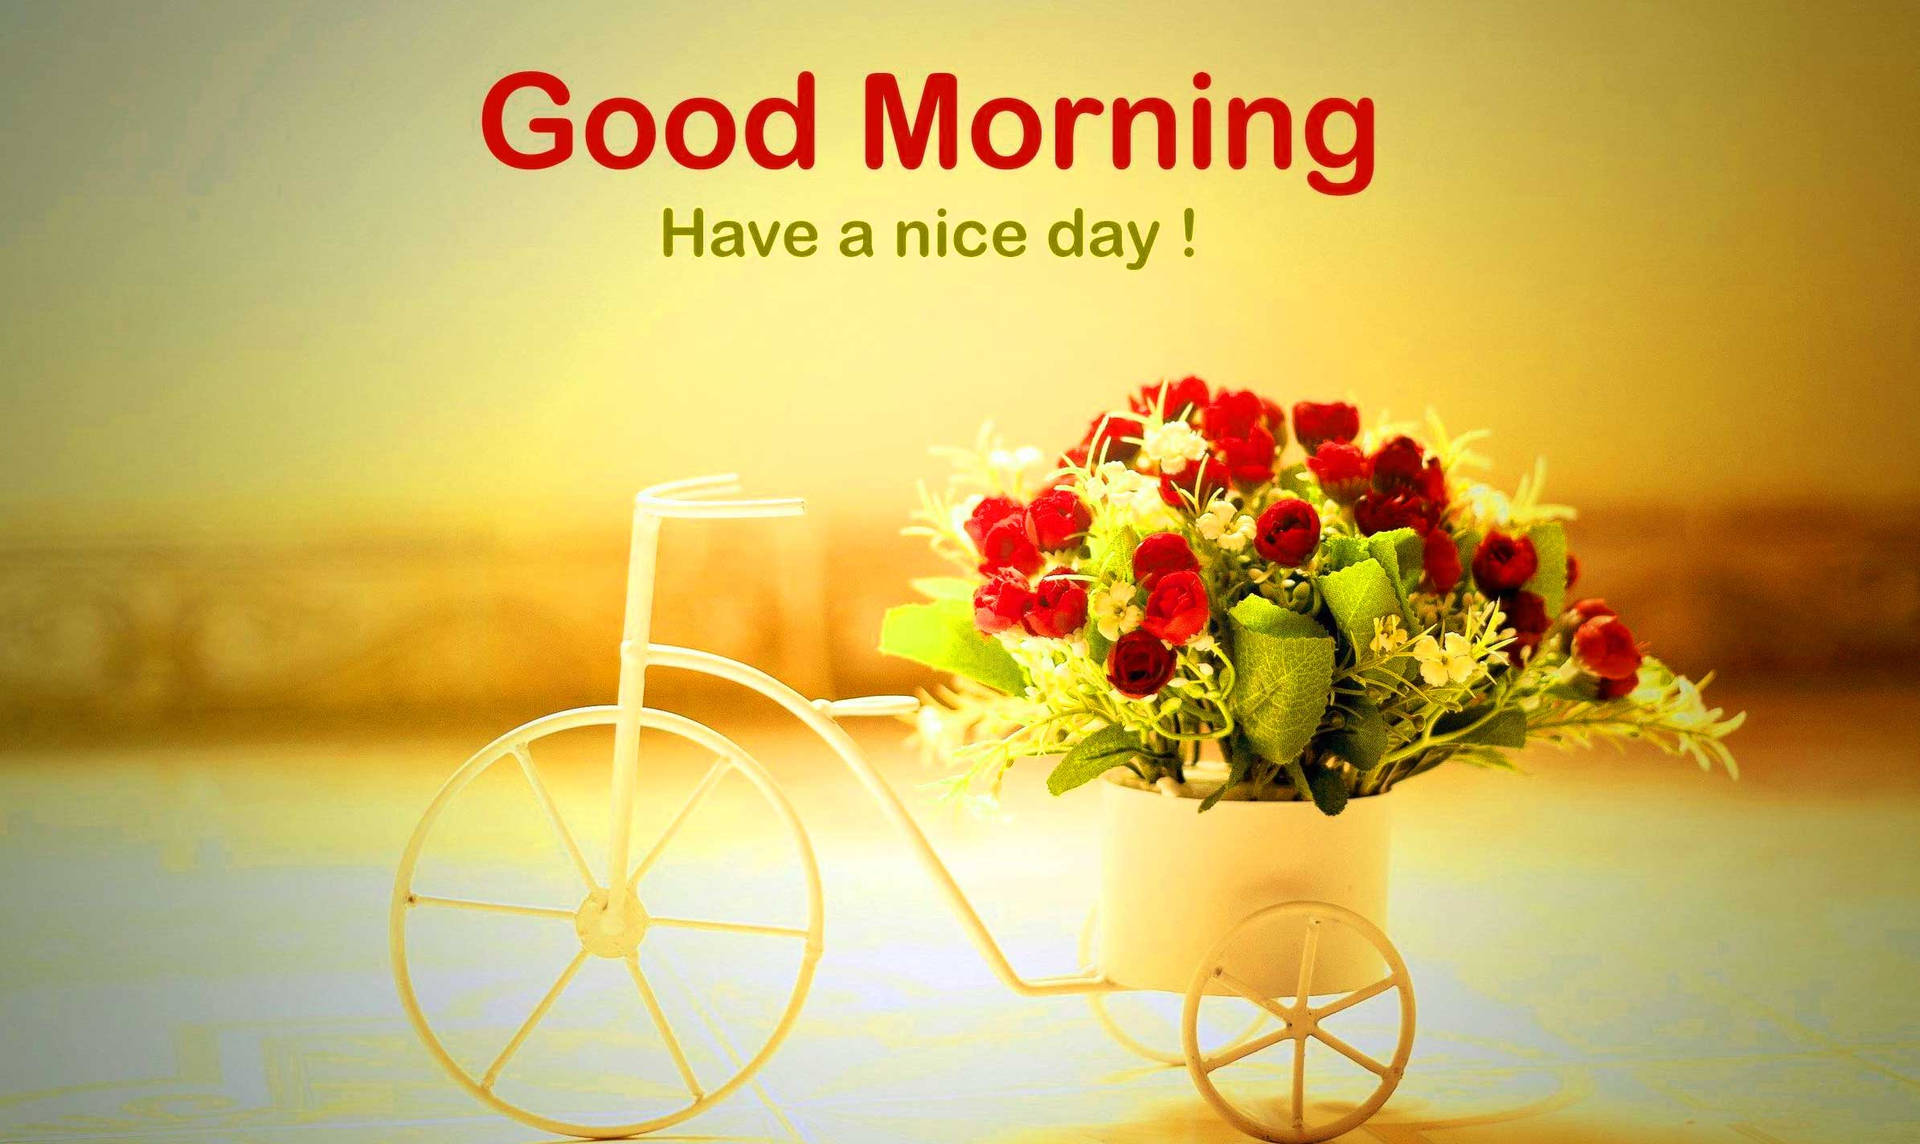 Good Morning Image Photo Wallpaper Picture Free Download Background